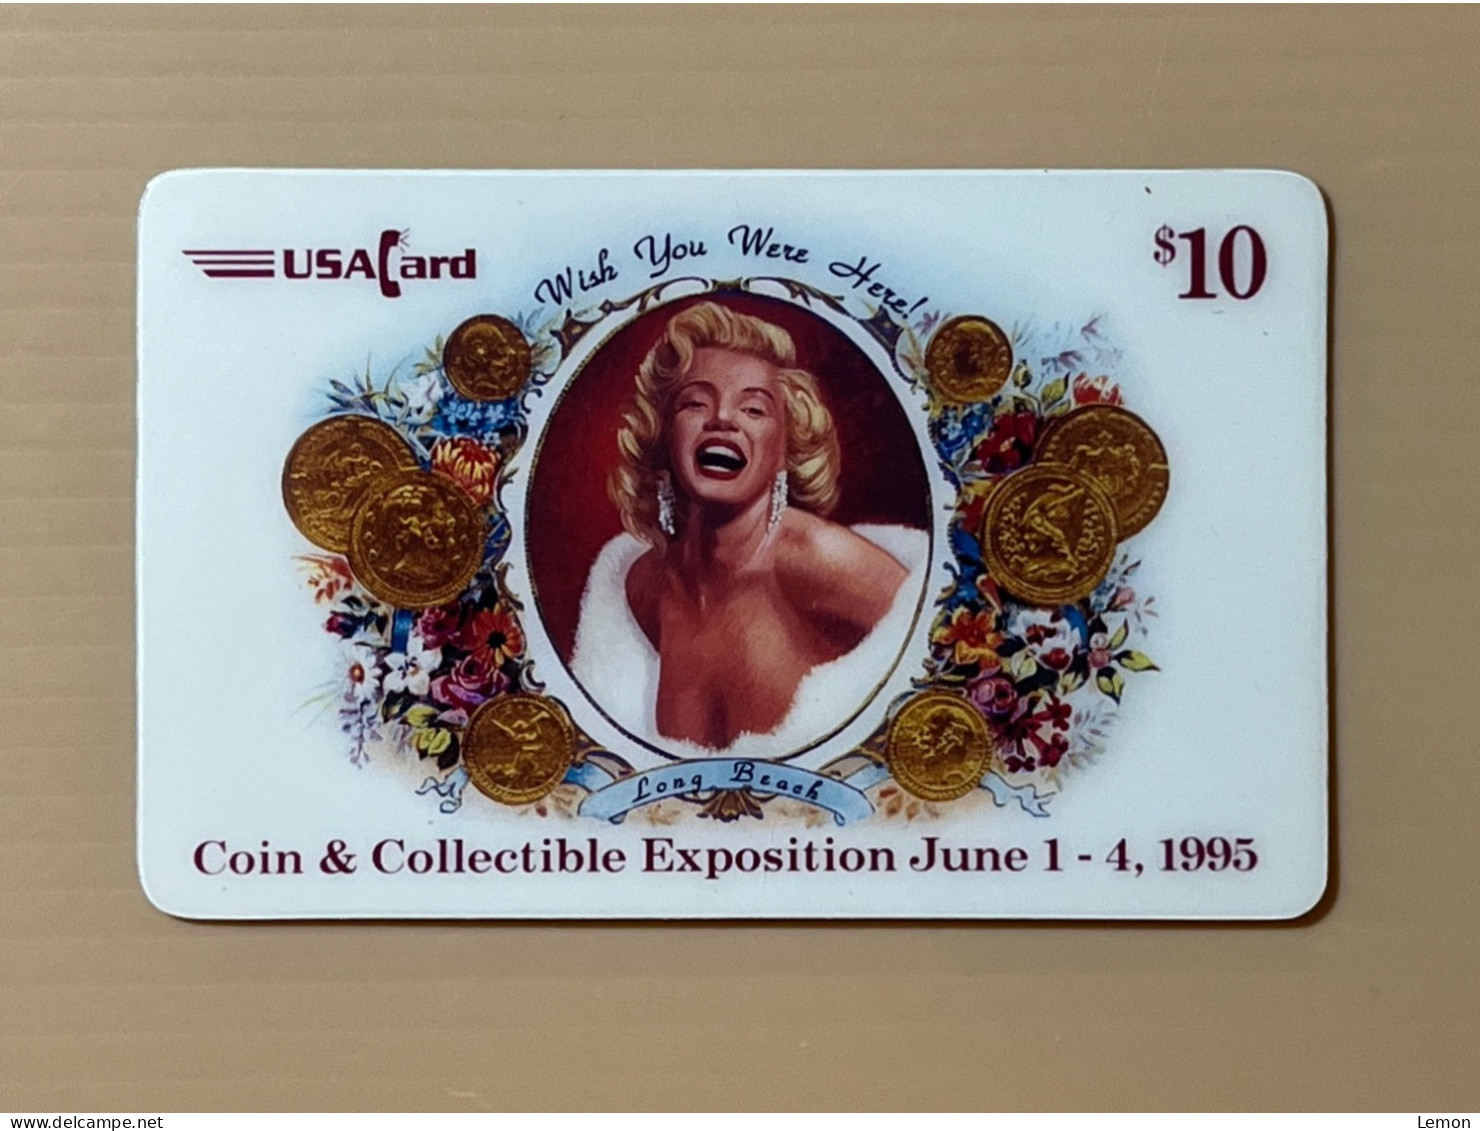 Mint USA UNITED STATES America Prepaid Telecard Phonecard, Coin & Collectible Expo 1995, Set Of 1 Mint Card With Folder - Verzamelingen